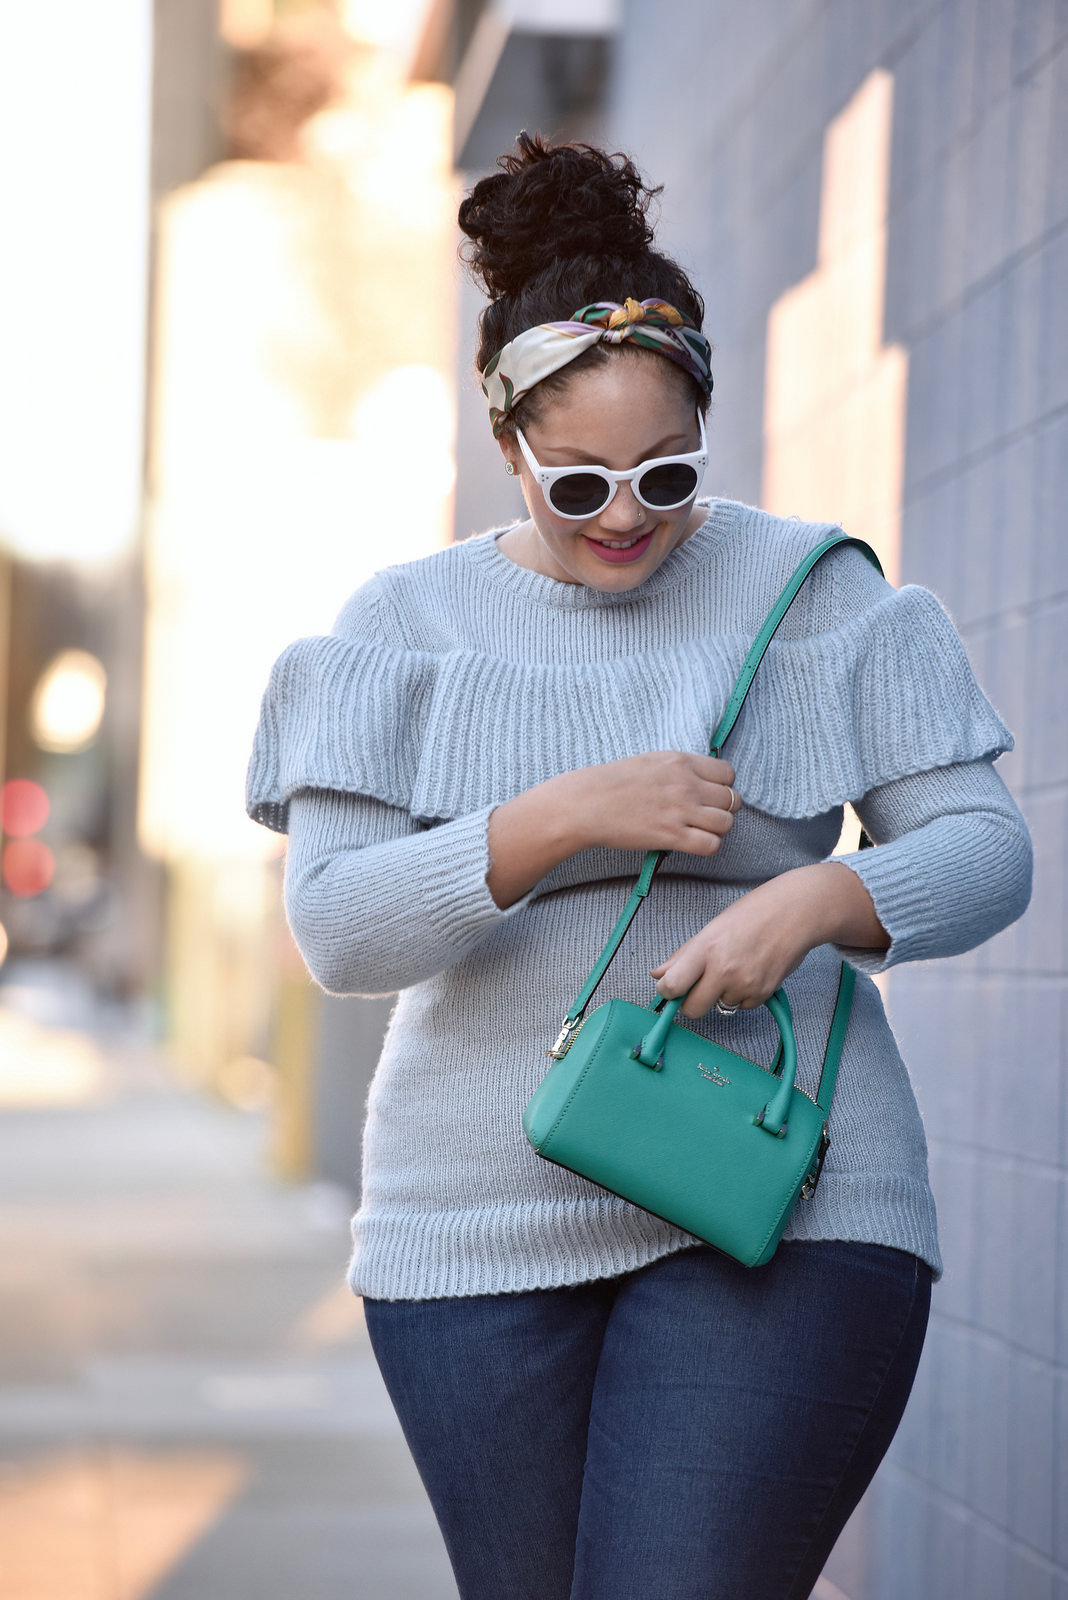 Girl With Curves featuring a ruffle sweater from Asos, bag from Kate Spade, jeans from Old Navy and white sunglasses.